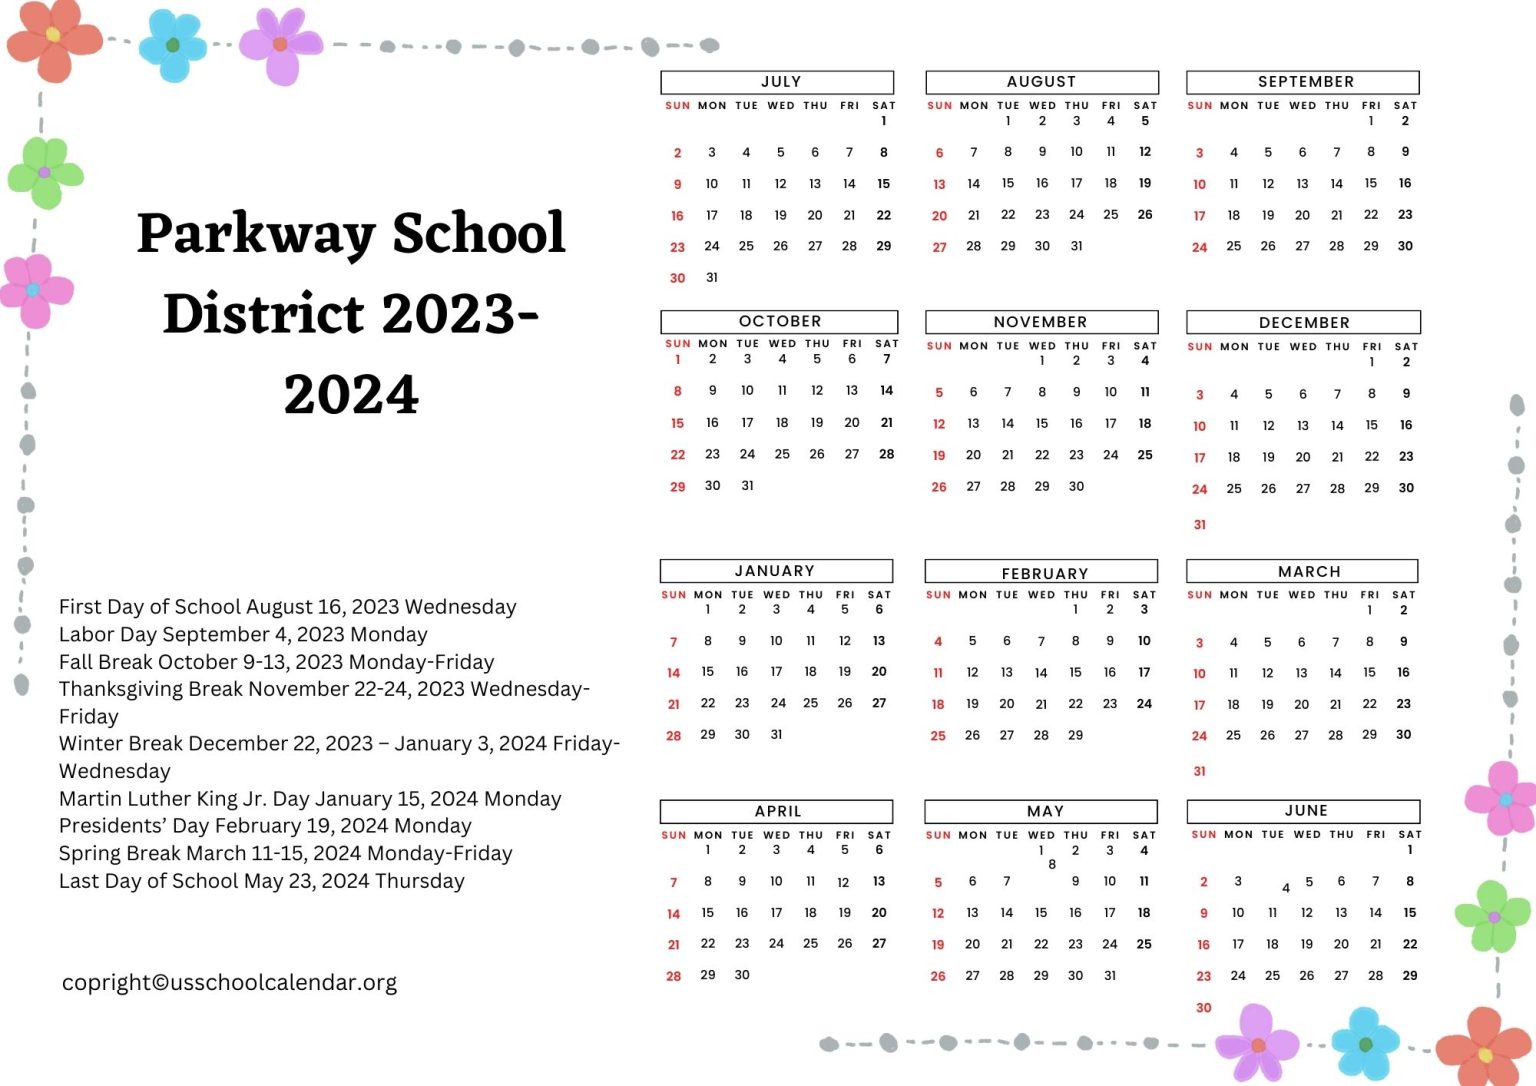 Parkway School District Calendar With Holidays 20232024